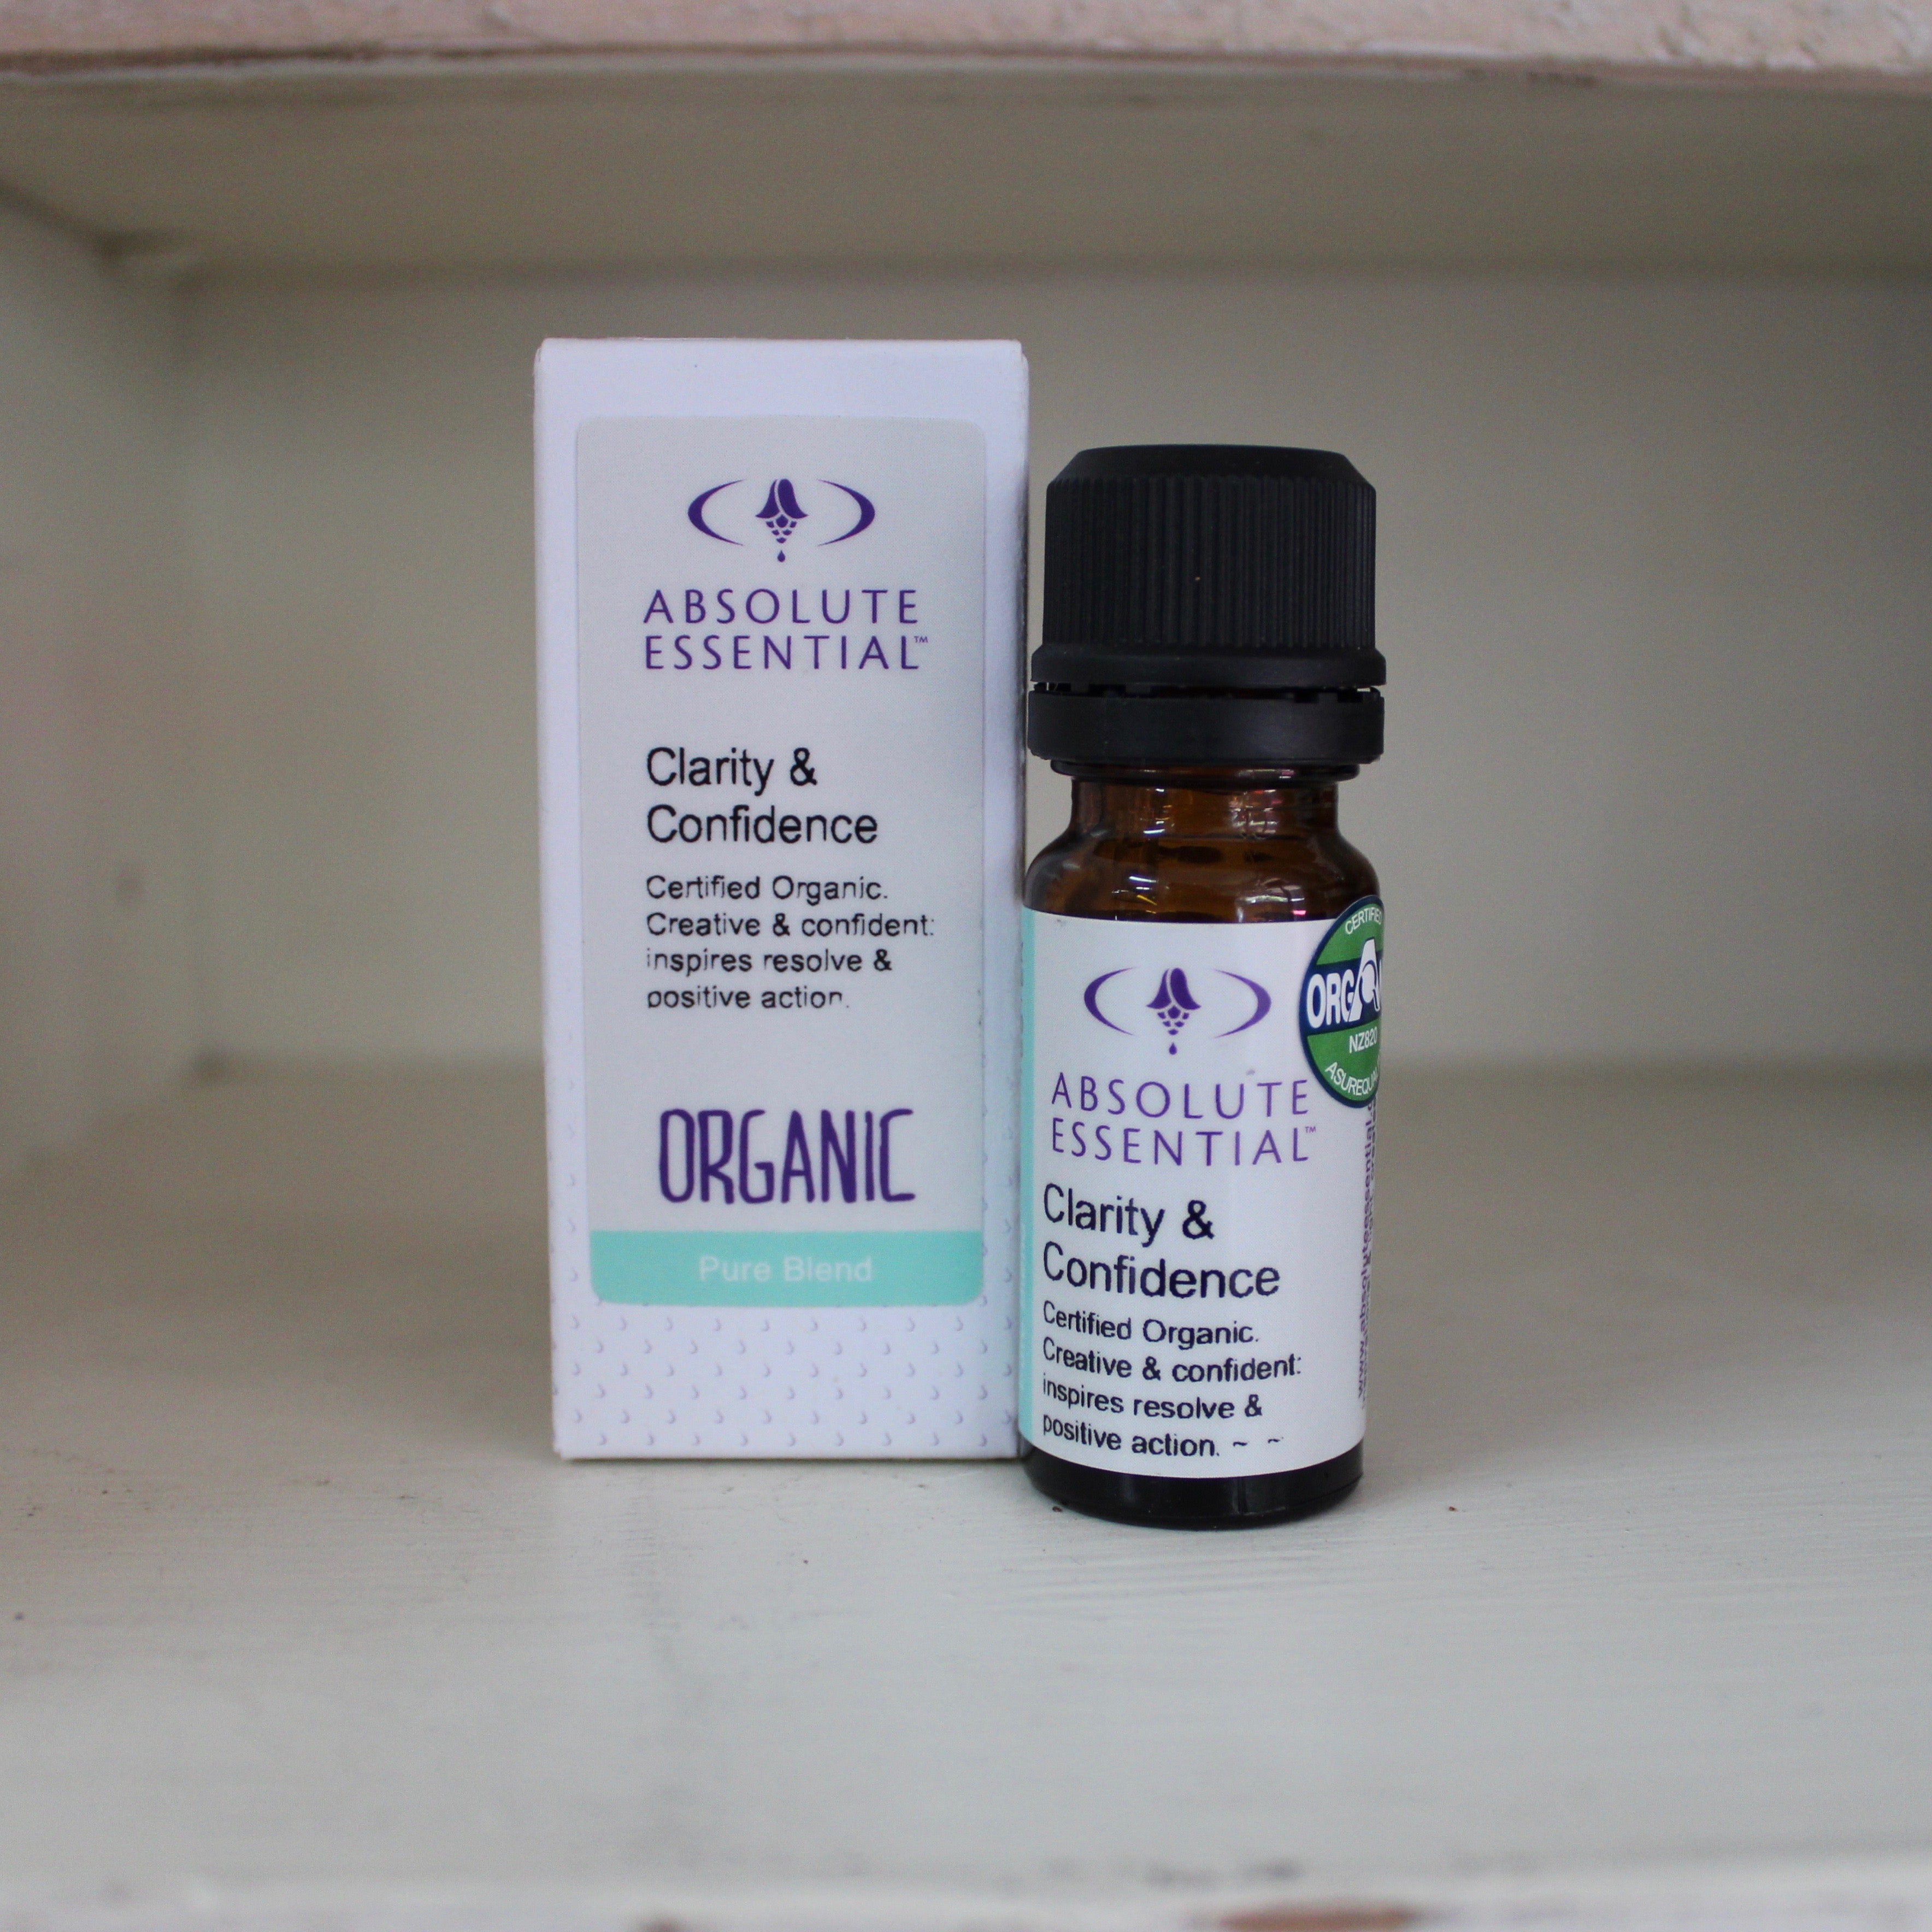 Absolute Essential Clarity & Confidence (Organic) 10ml Pure Blend